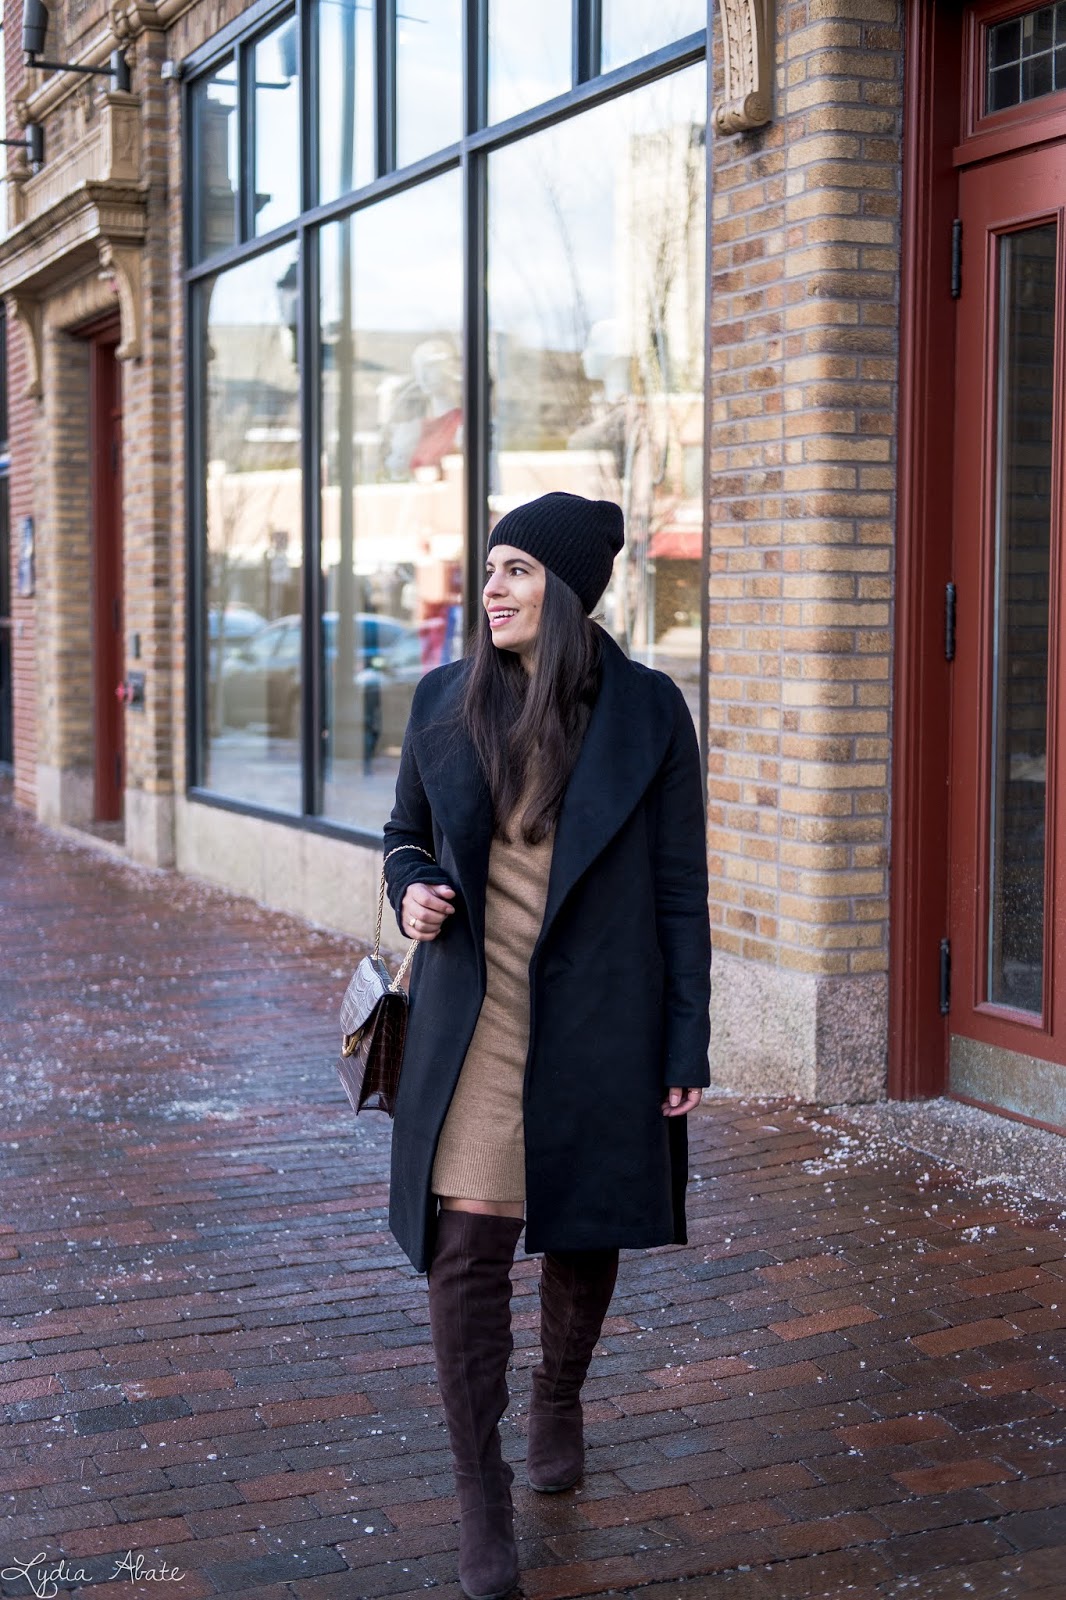 Winterized - Chic on the Cheap  Connecticut based style blogger